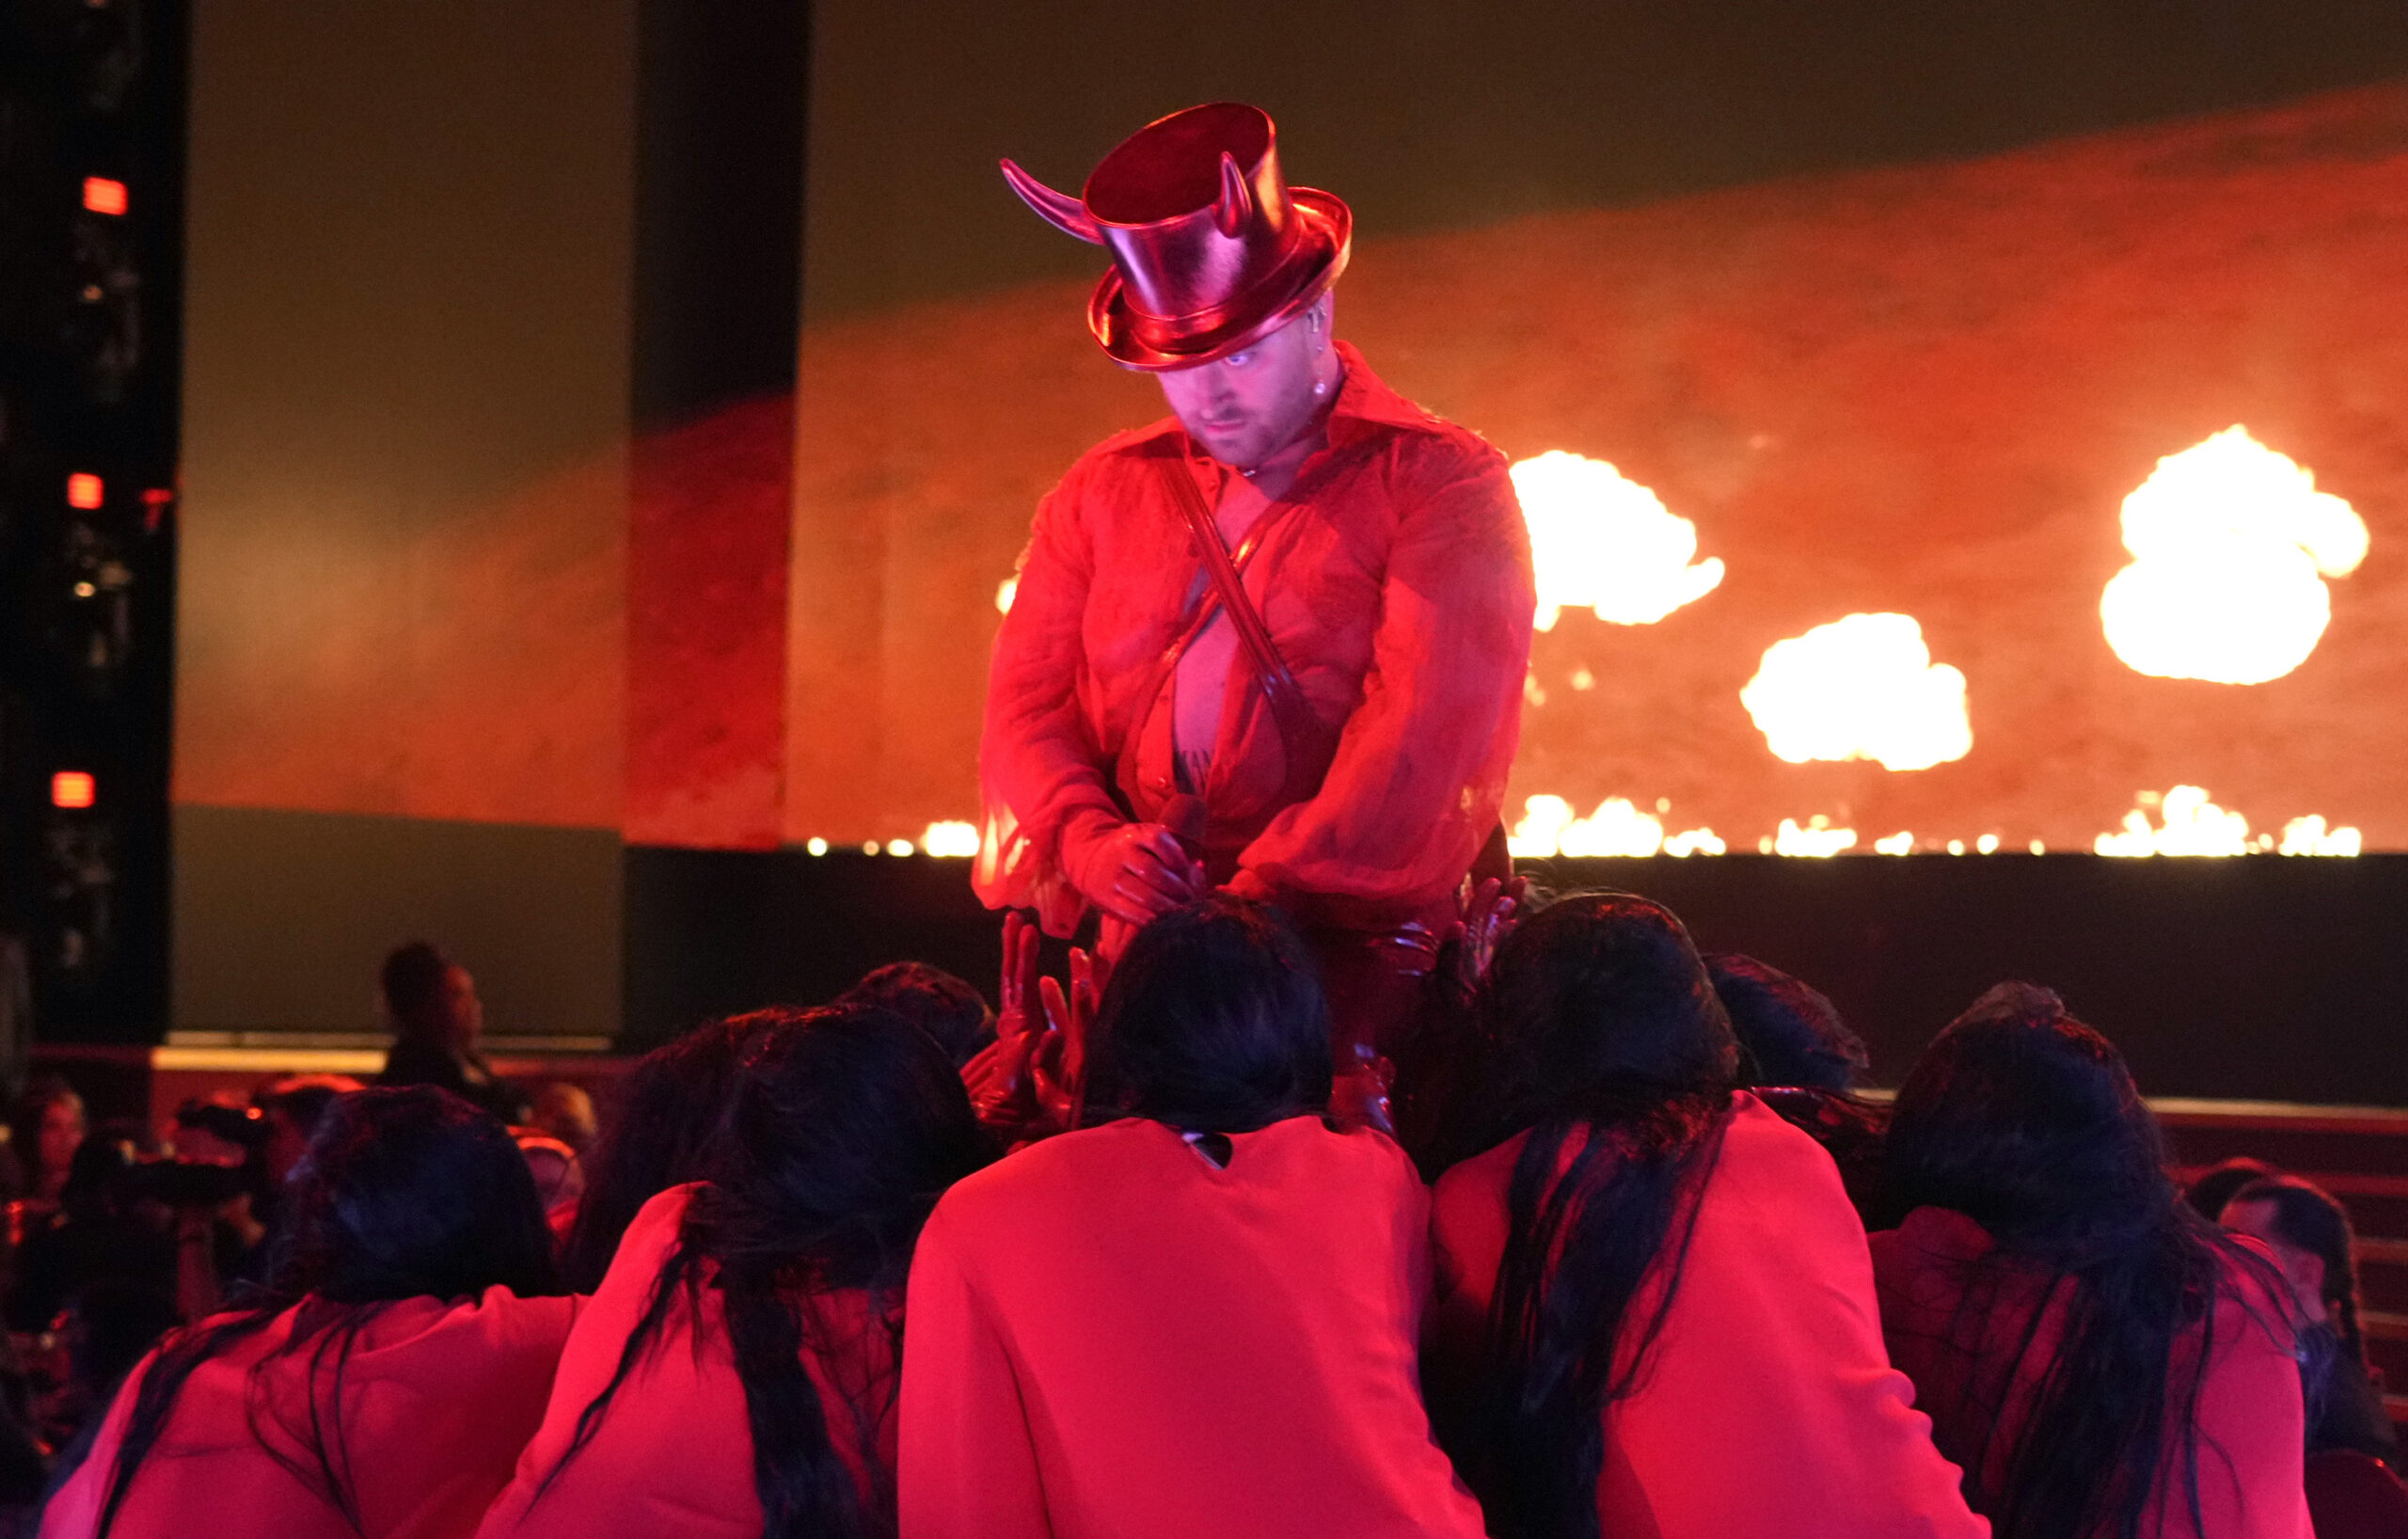 ‘Can’t Make This Stuff Up’: Twitter Reacts To Pfizer Sponsoring Satan-Themed Grammys Performance